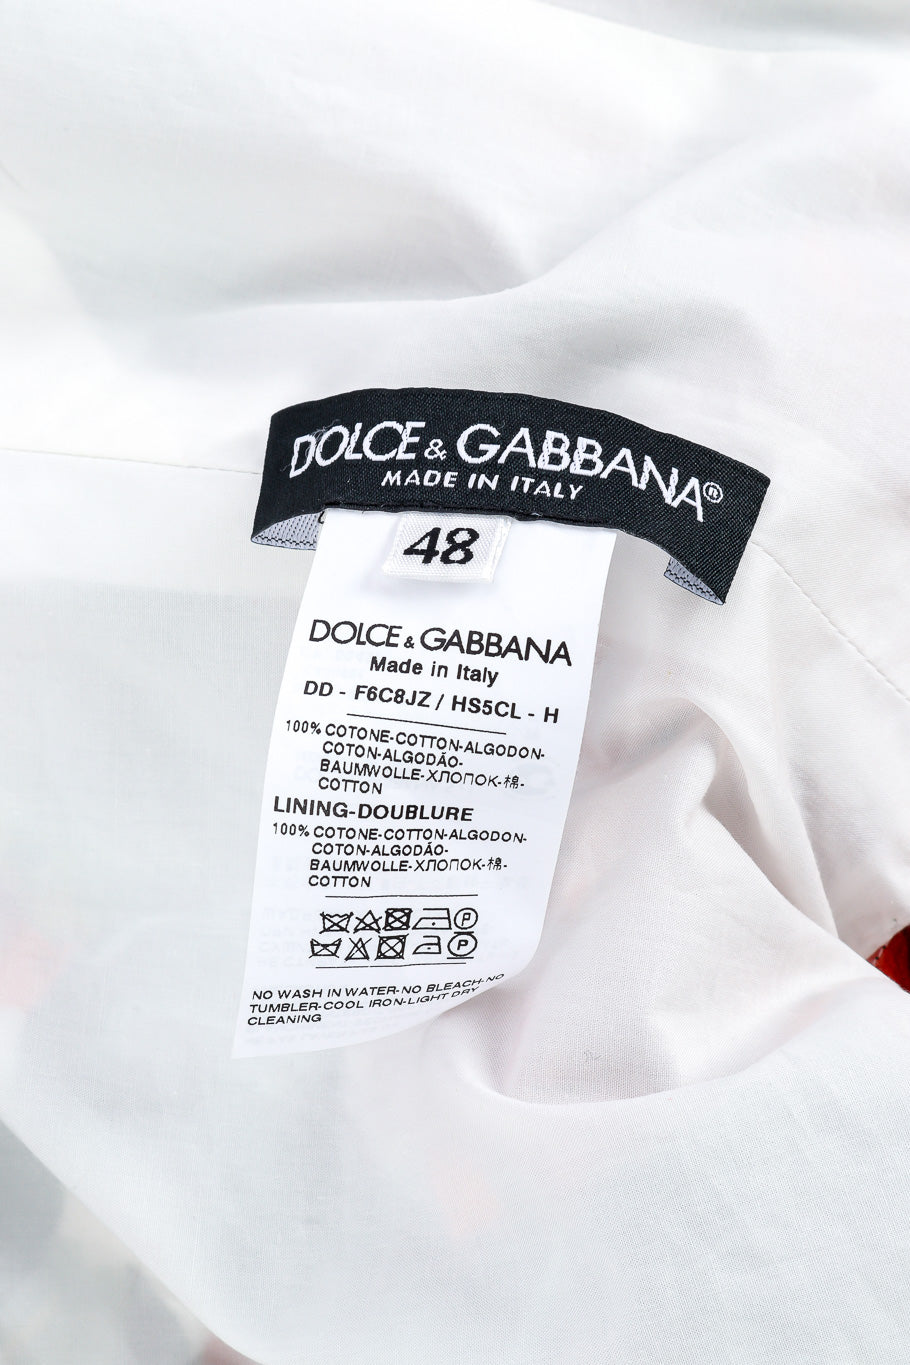 Dolce and Gabbana Floral Leaf Cotton Dress label and size tag @recessla